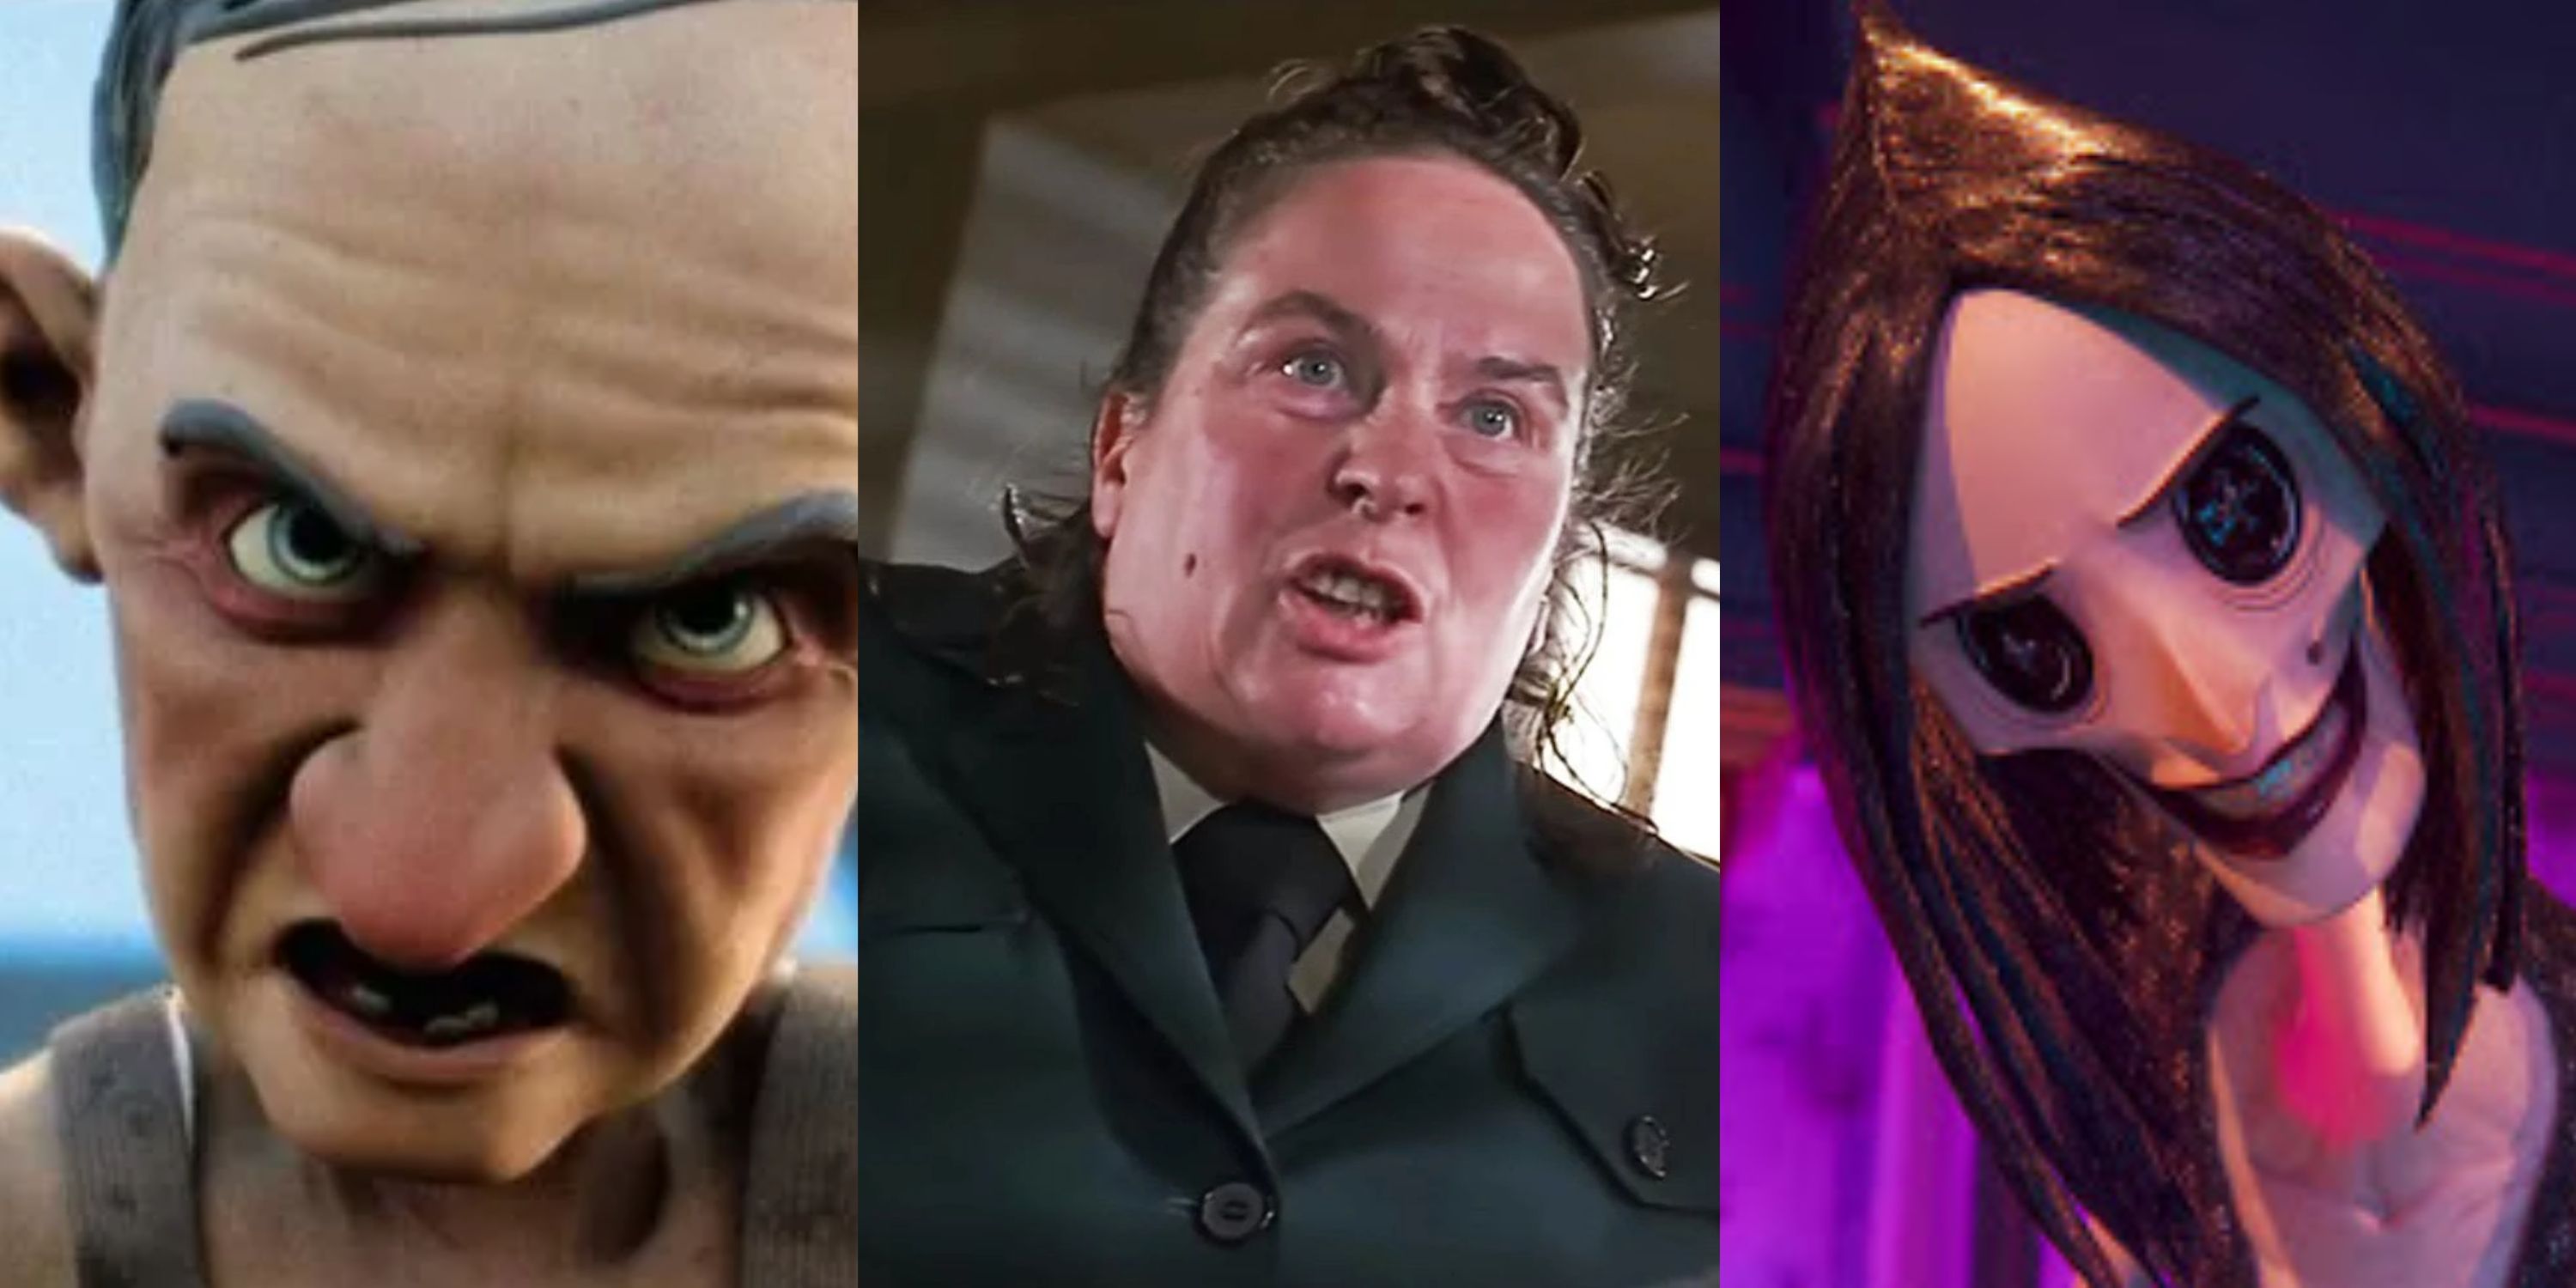 Split image of Mr. Nebbercracker scowling, Ms. Trunchbull yelling, and the Other Mother smiling creepily